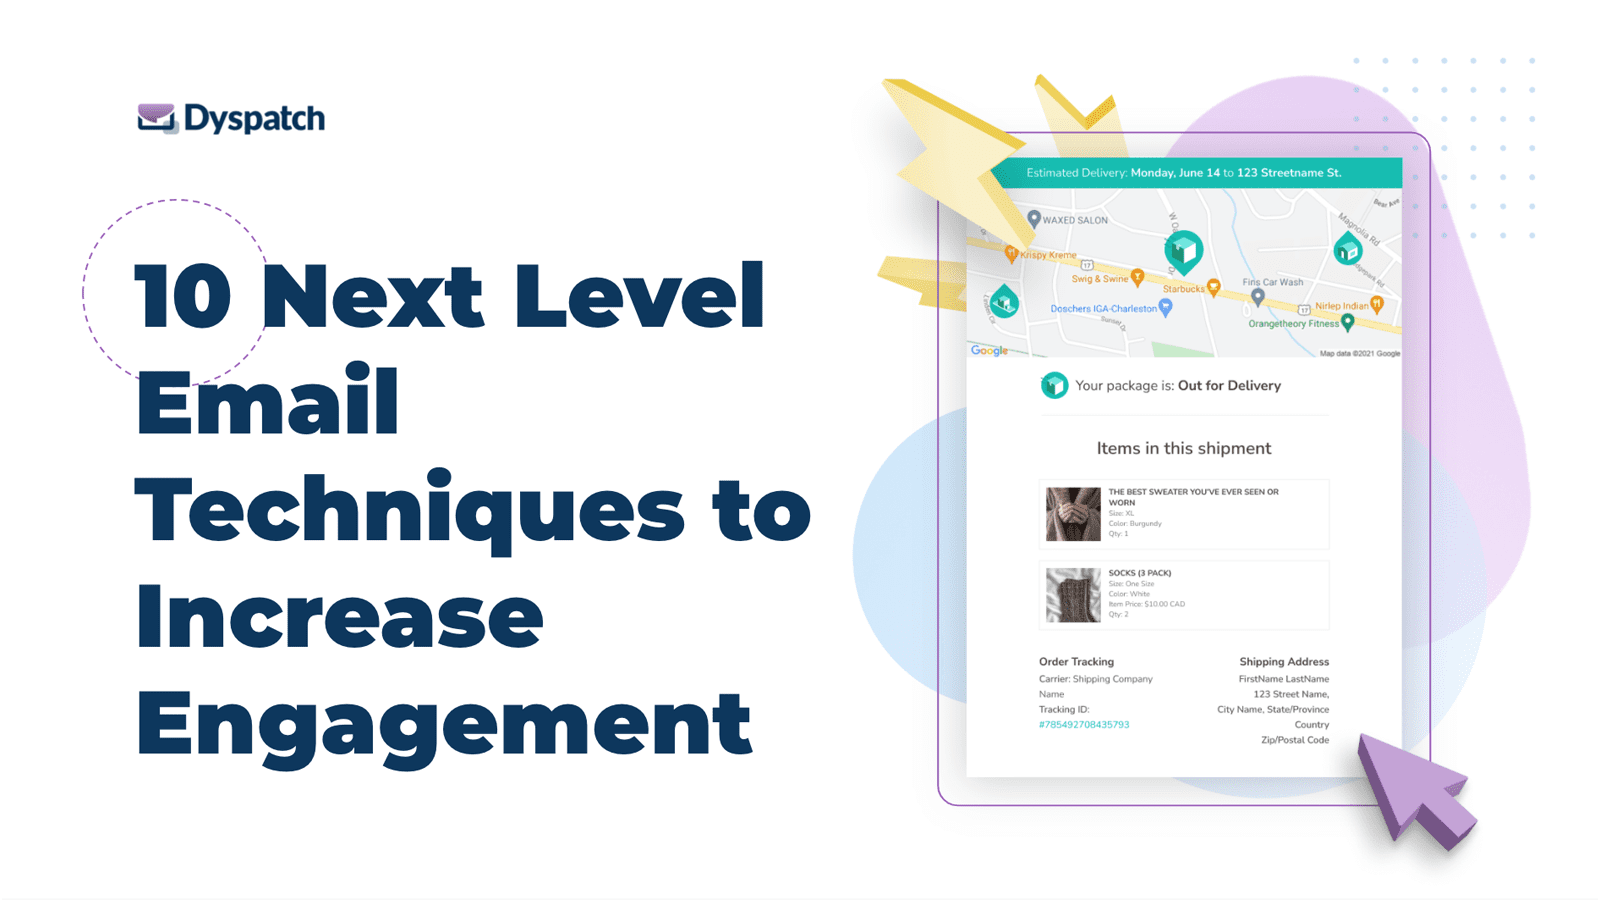 Dyspatch 10 Next Level Email Techniques to Increase Engagement